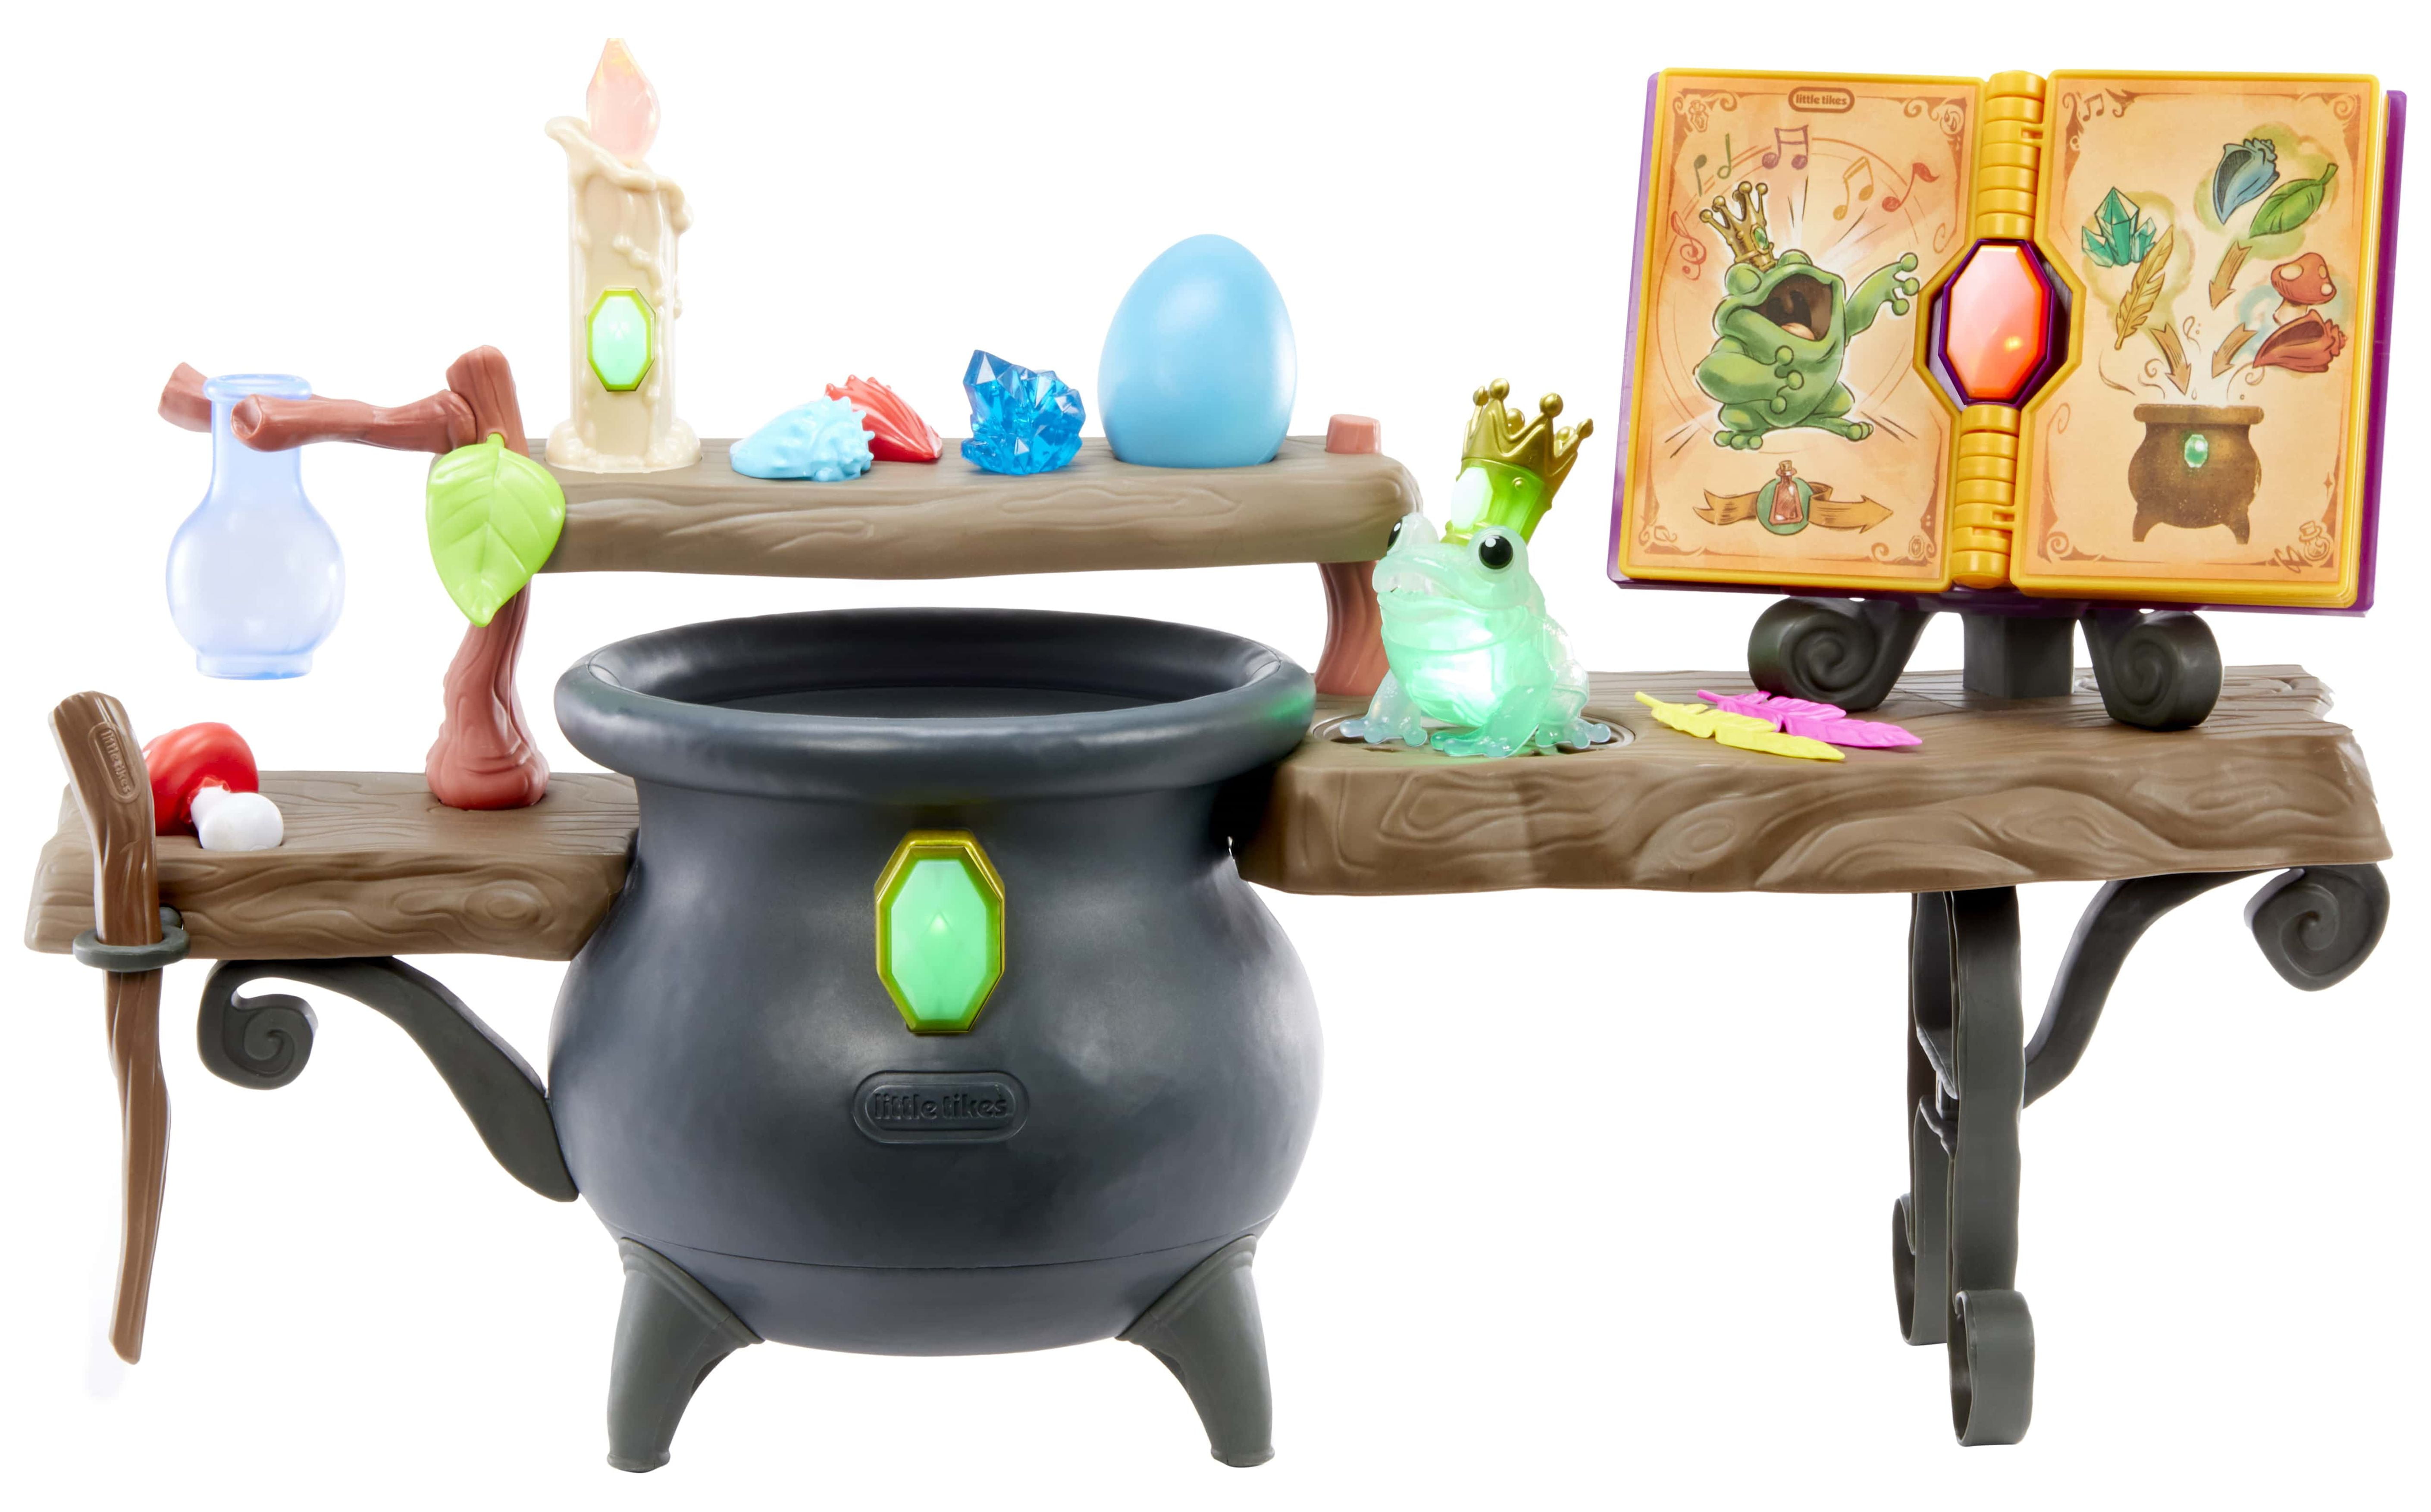  BLUEY Tree Playset with Secret Hideaway, Flower Crown and Fairy  Figures and Accessories : Toys & Games